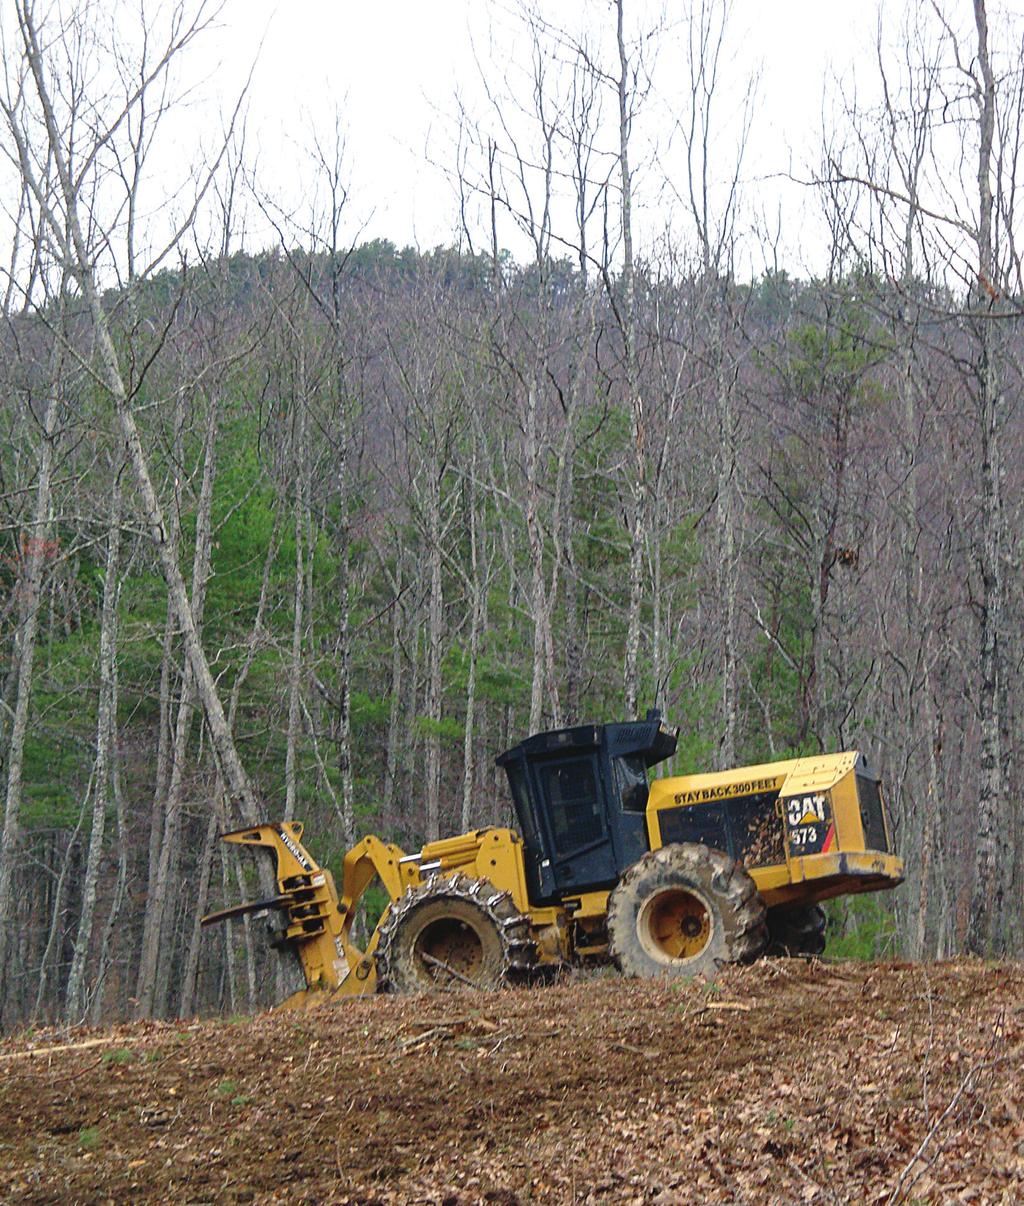 Most people have a general idea of what they think a logging operation looks like. However, logging systems can vary significantly among loggers and across regions.